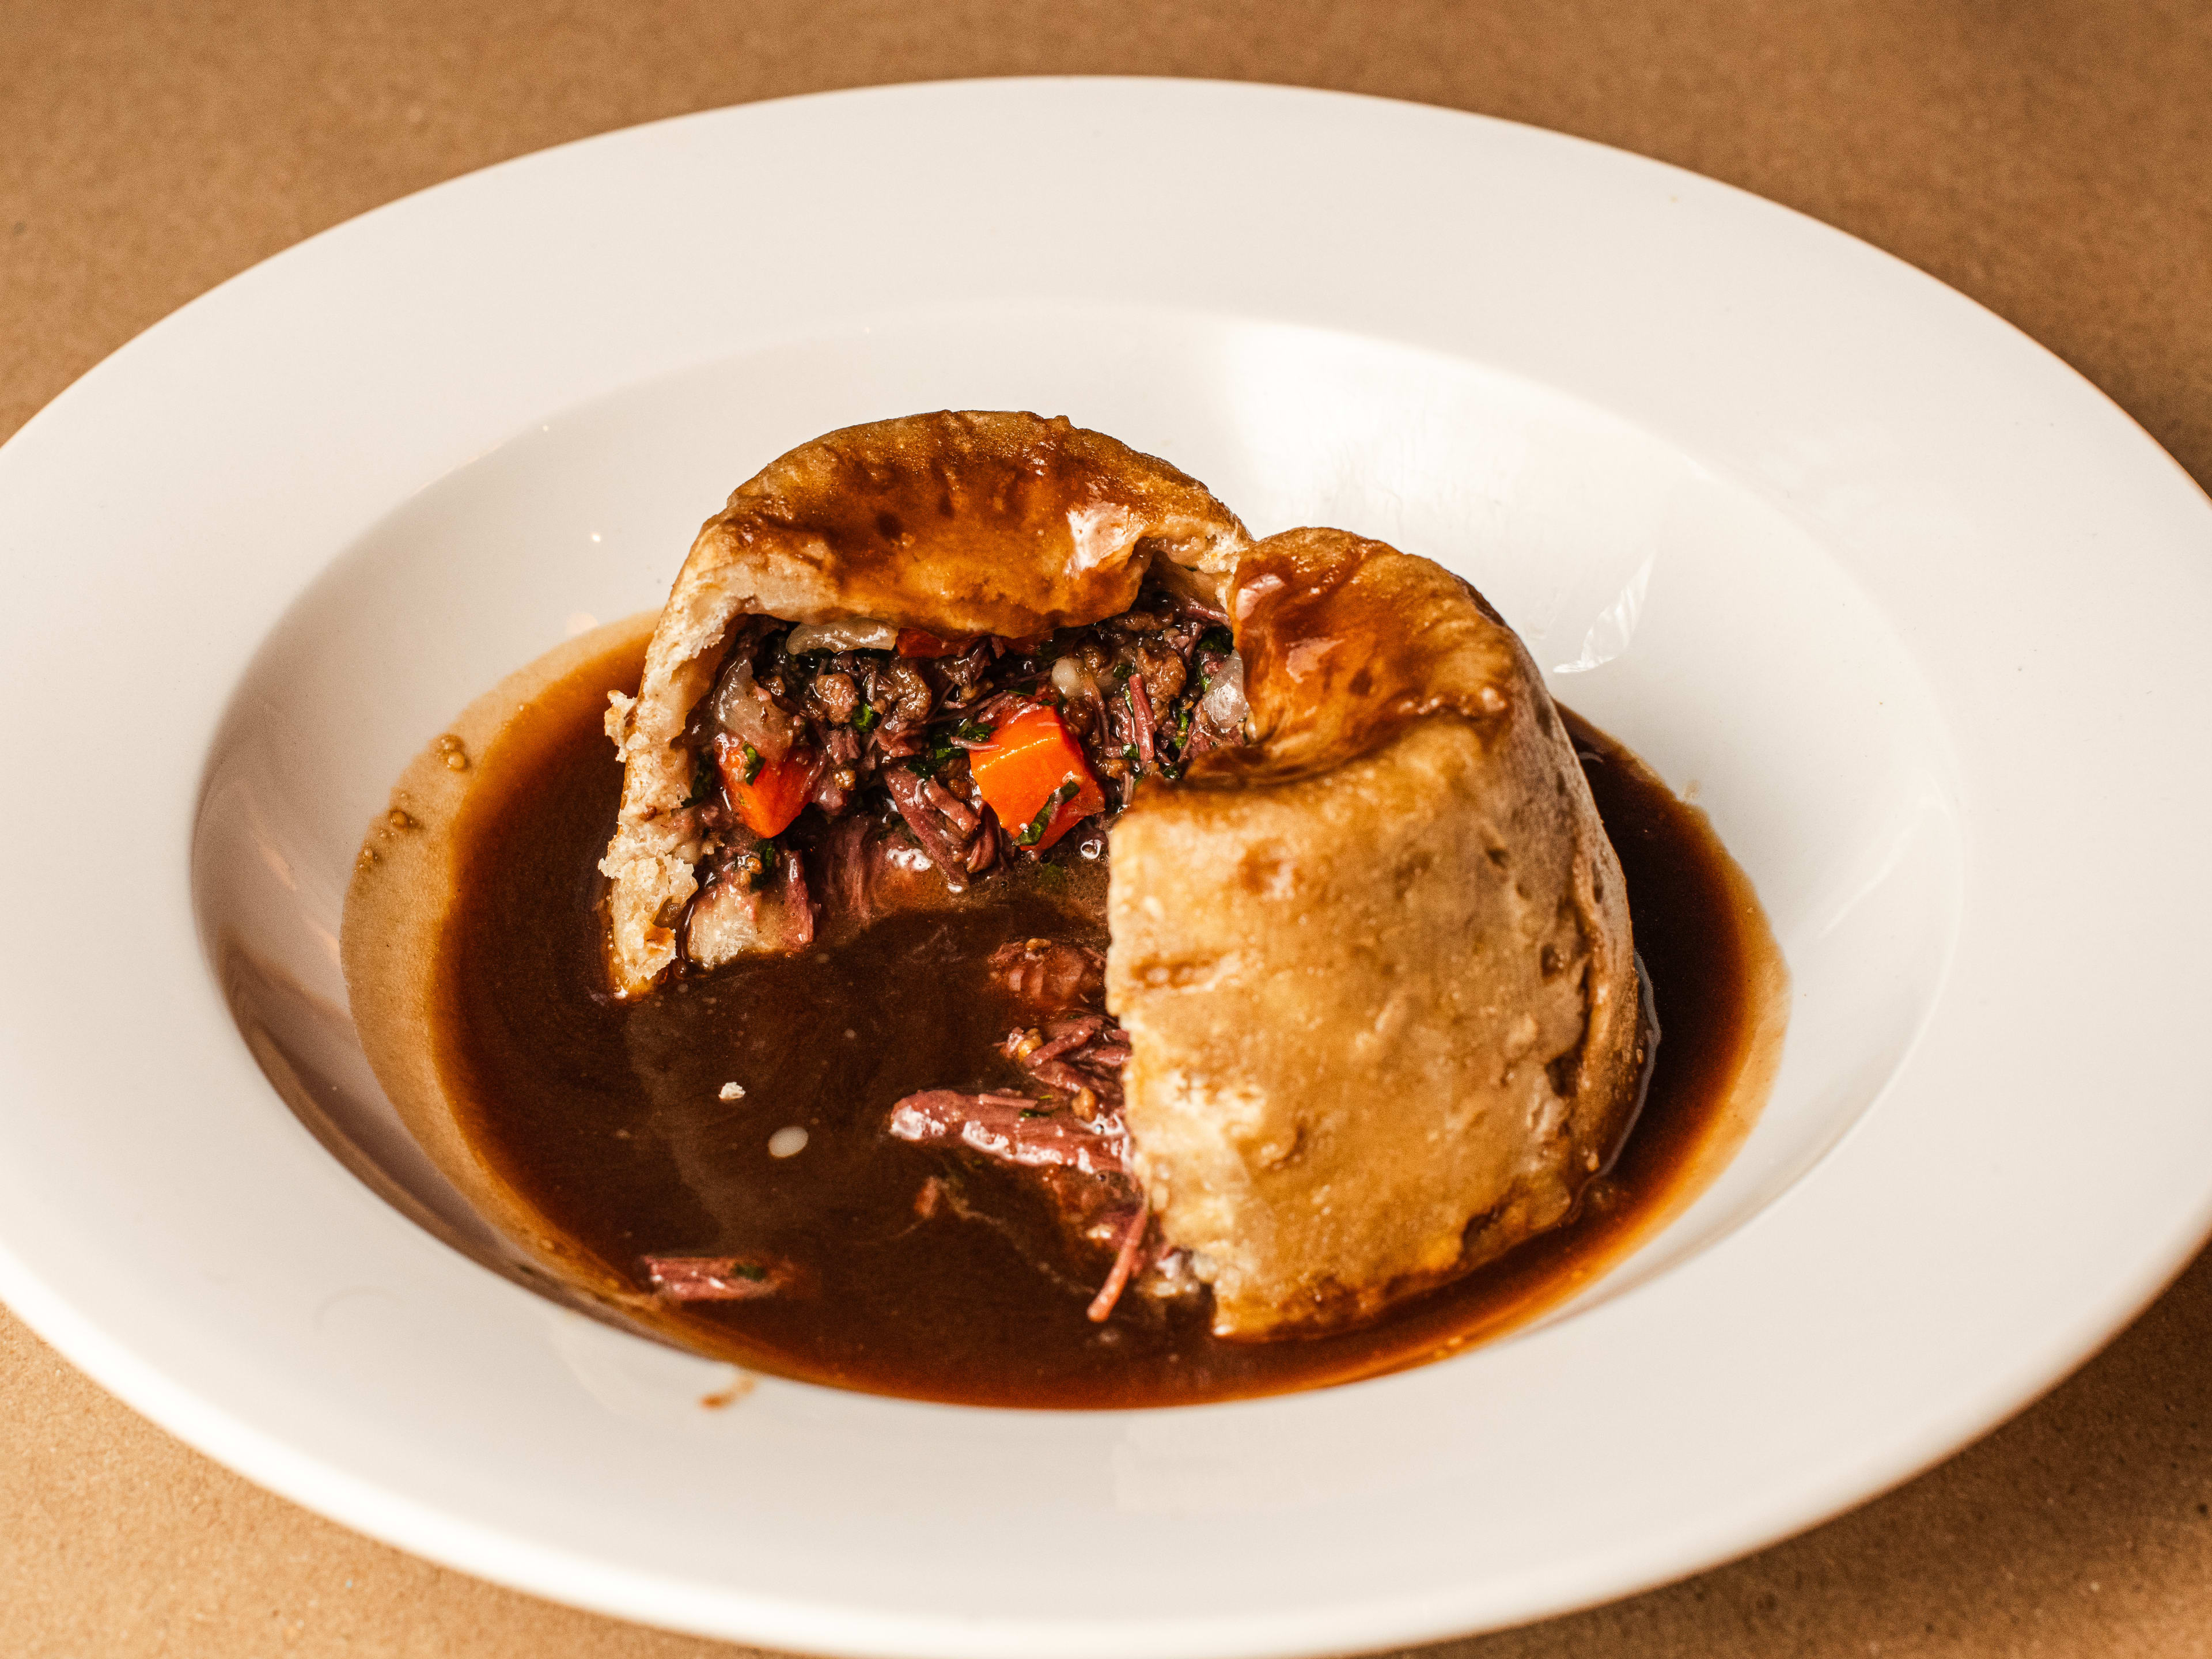 The beef cheek Guinness suet pudding from The Devonshire.